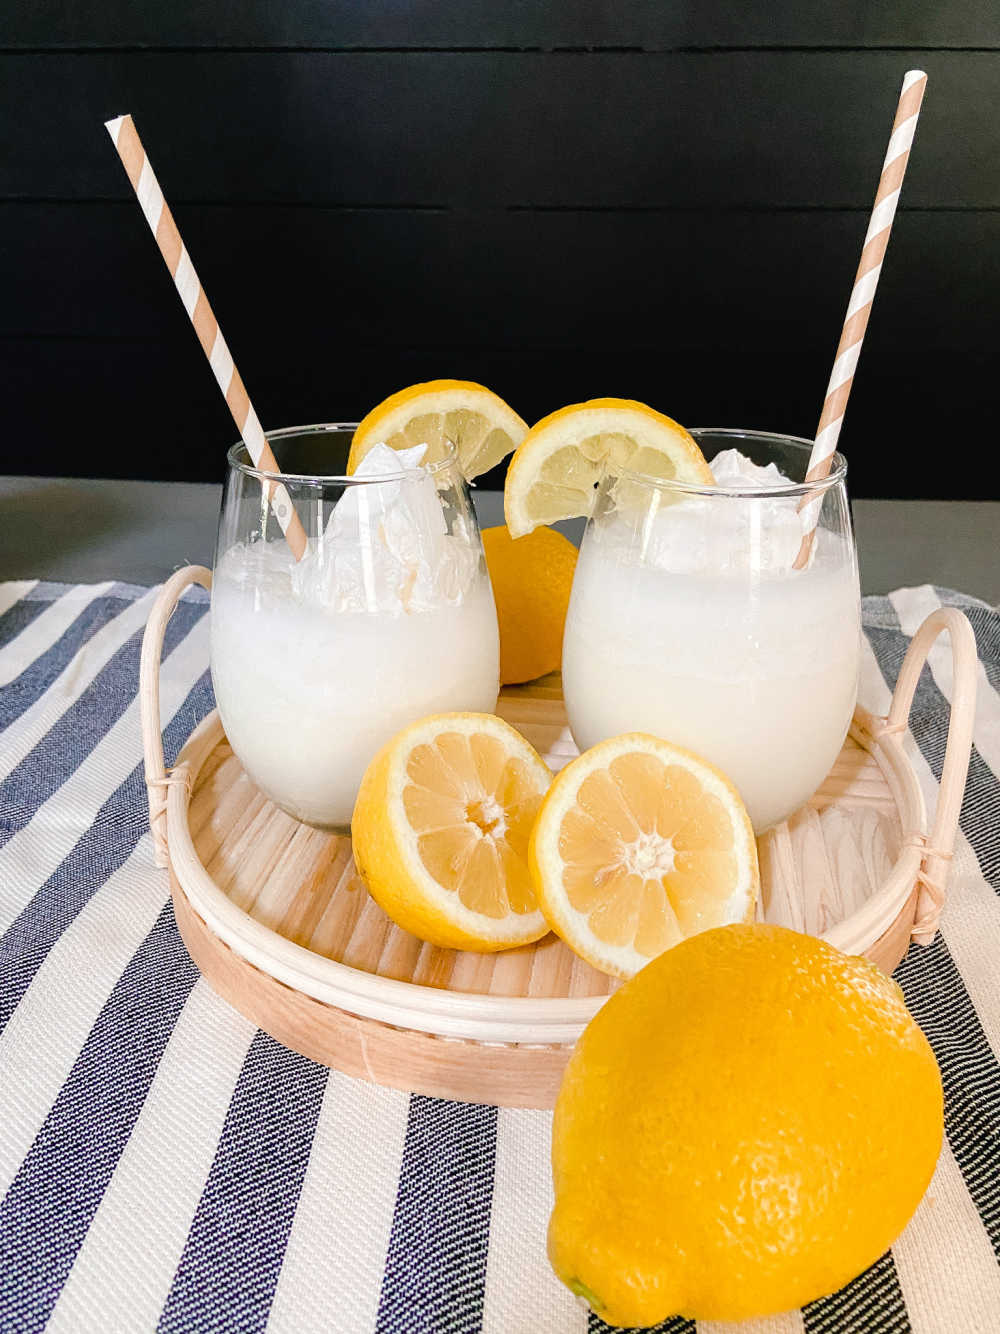 Copycat Chick-fil-A Frozen Lemonade. Cool off with this delicious treat that's tangy, tart and full of lemon flavor plus it's low in carbs! Keto friendly.